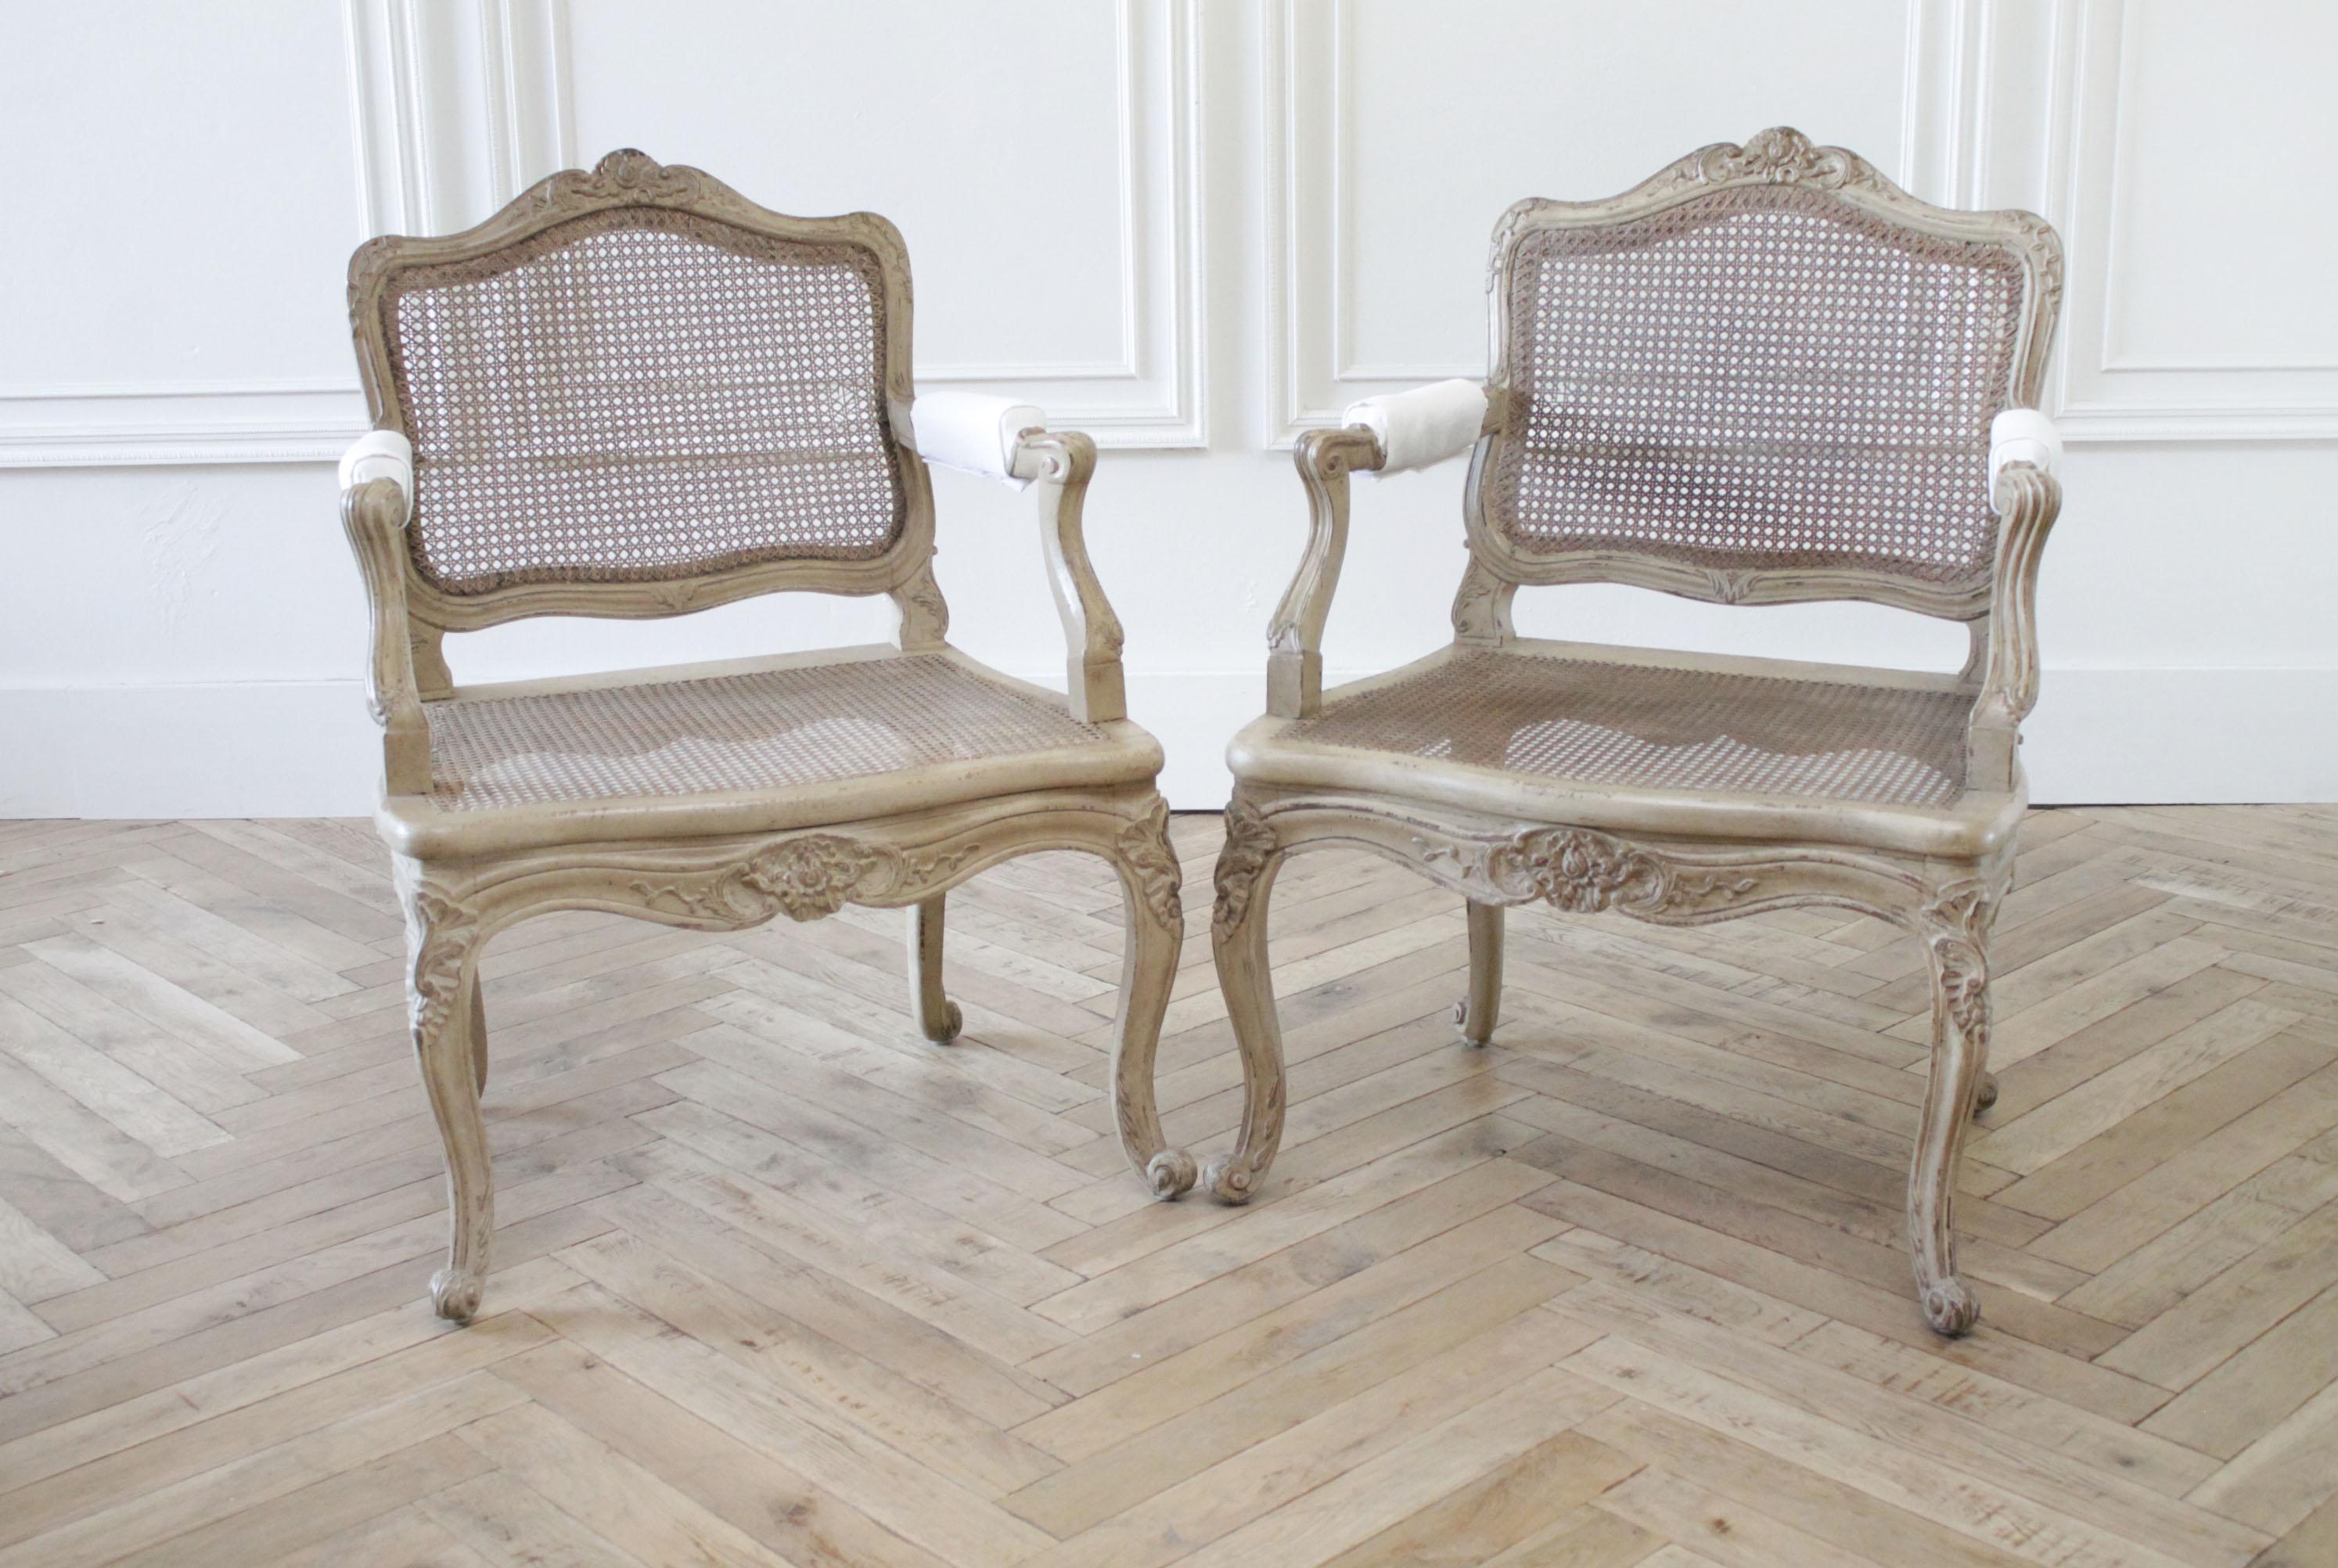 Pair of Antique French Arm Chairs in Original Painted Finish and White Linen 8